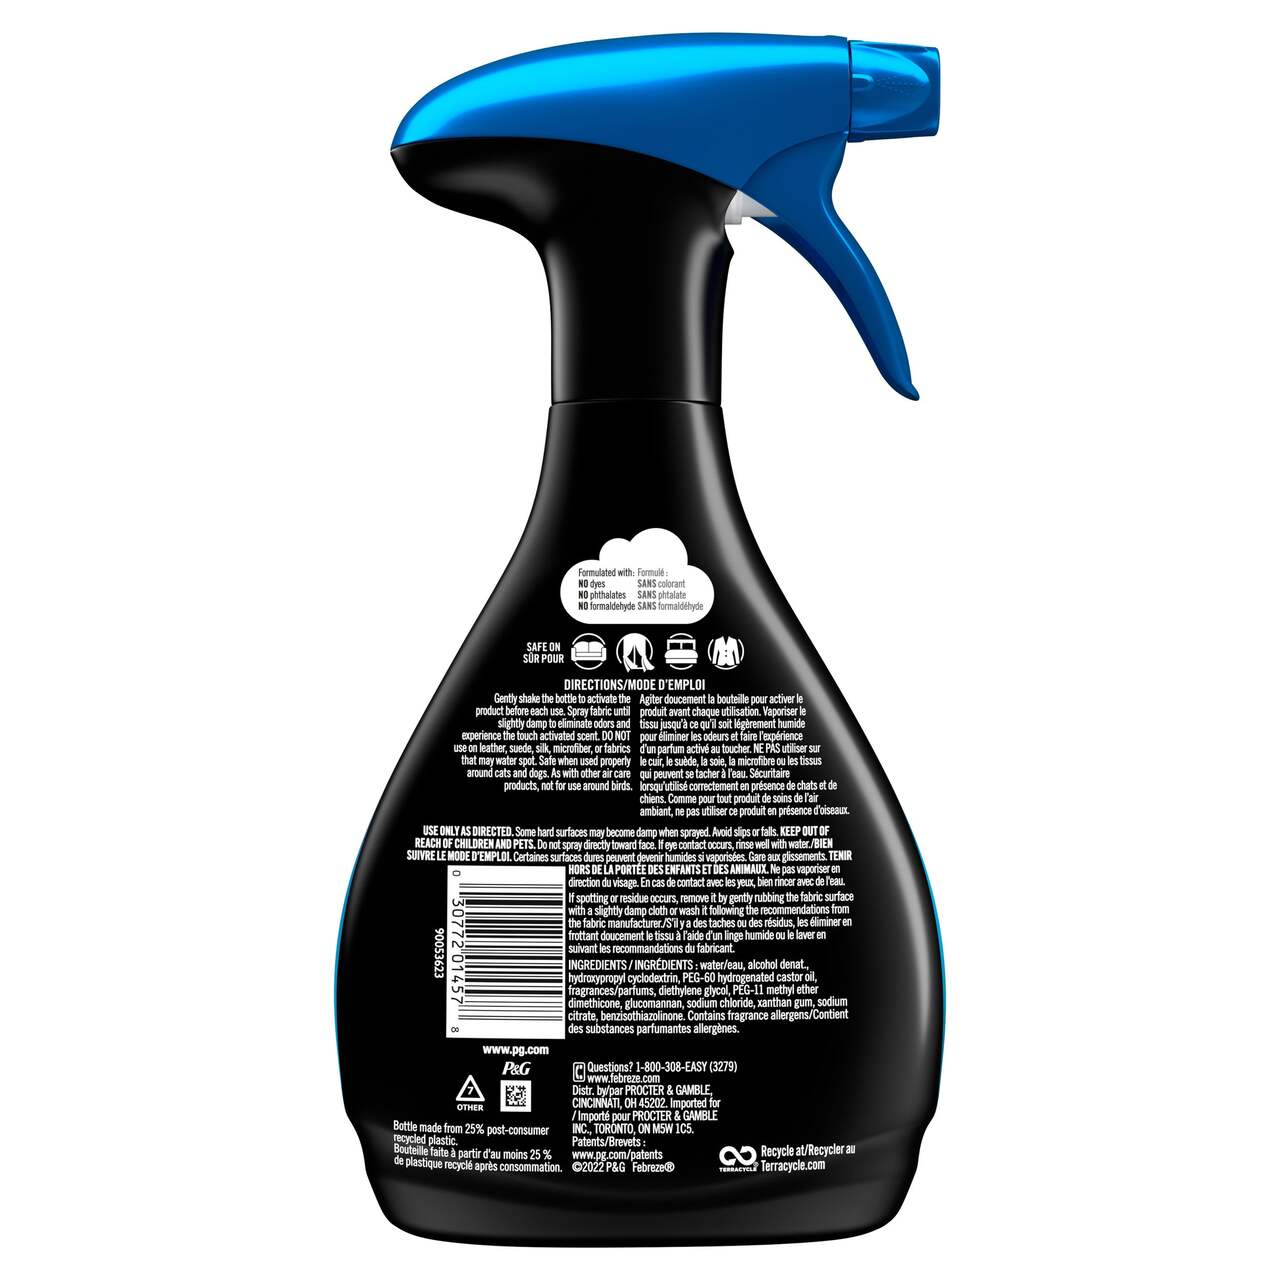 https://media-www.canadiantire.ca/product/living/cleaning/household-cleaning-solutions/1531643/febreze-unstopables-touch-fabric-spray-aqua-500ml-e5e97b27-b096-472f-94d4-08ee47077aee-jpgrendition.jpg?imdensity=1&imwidth=1244&impolicy=mZoom